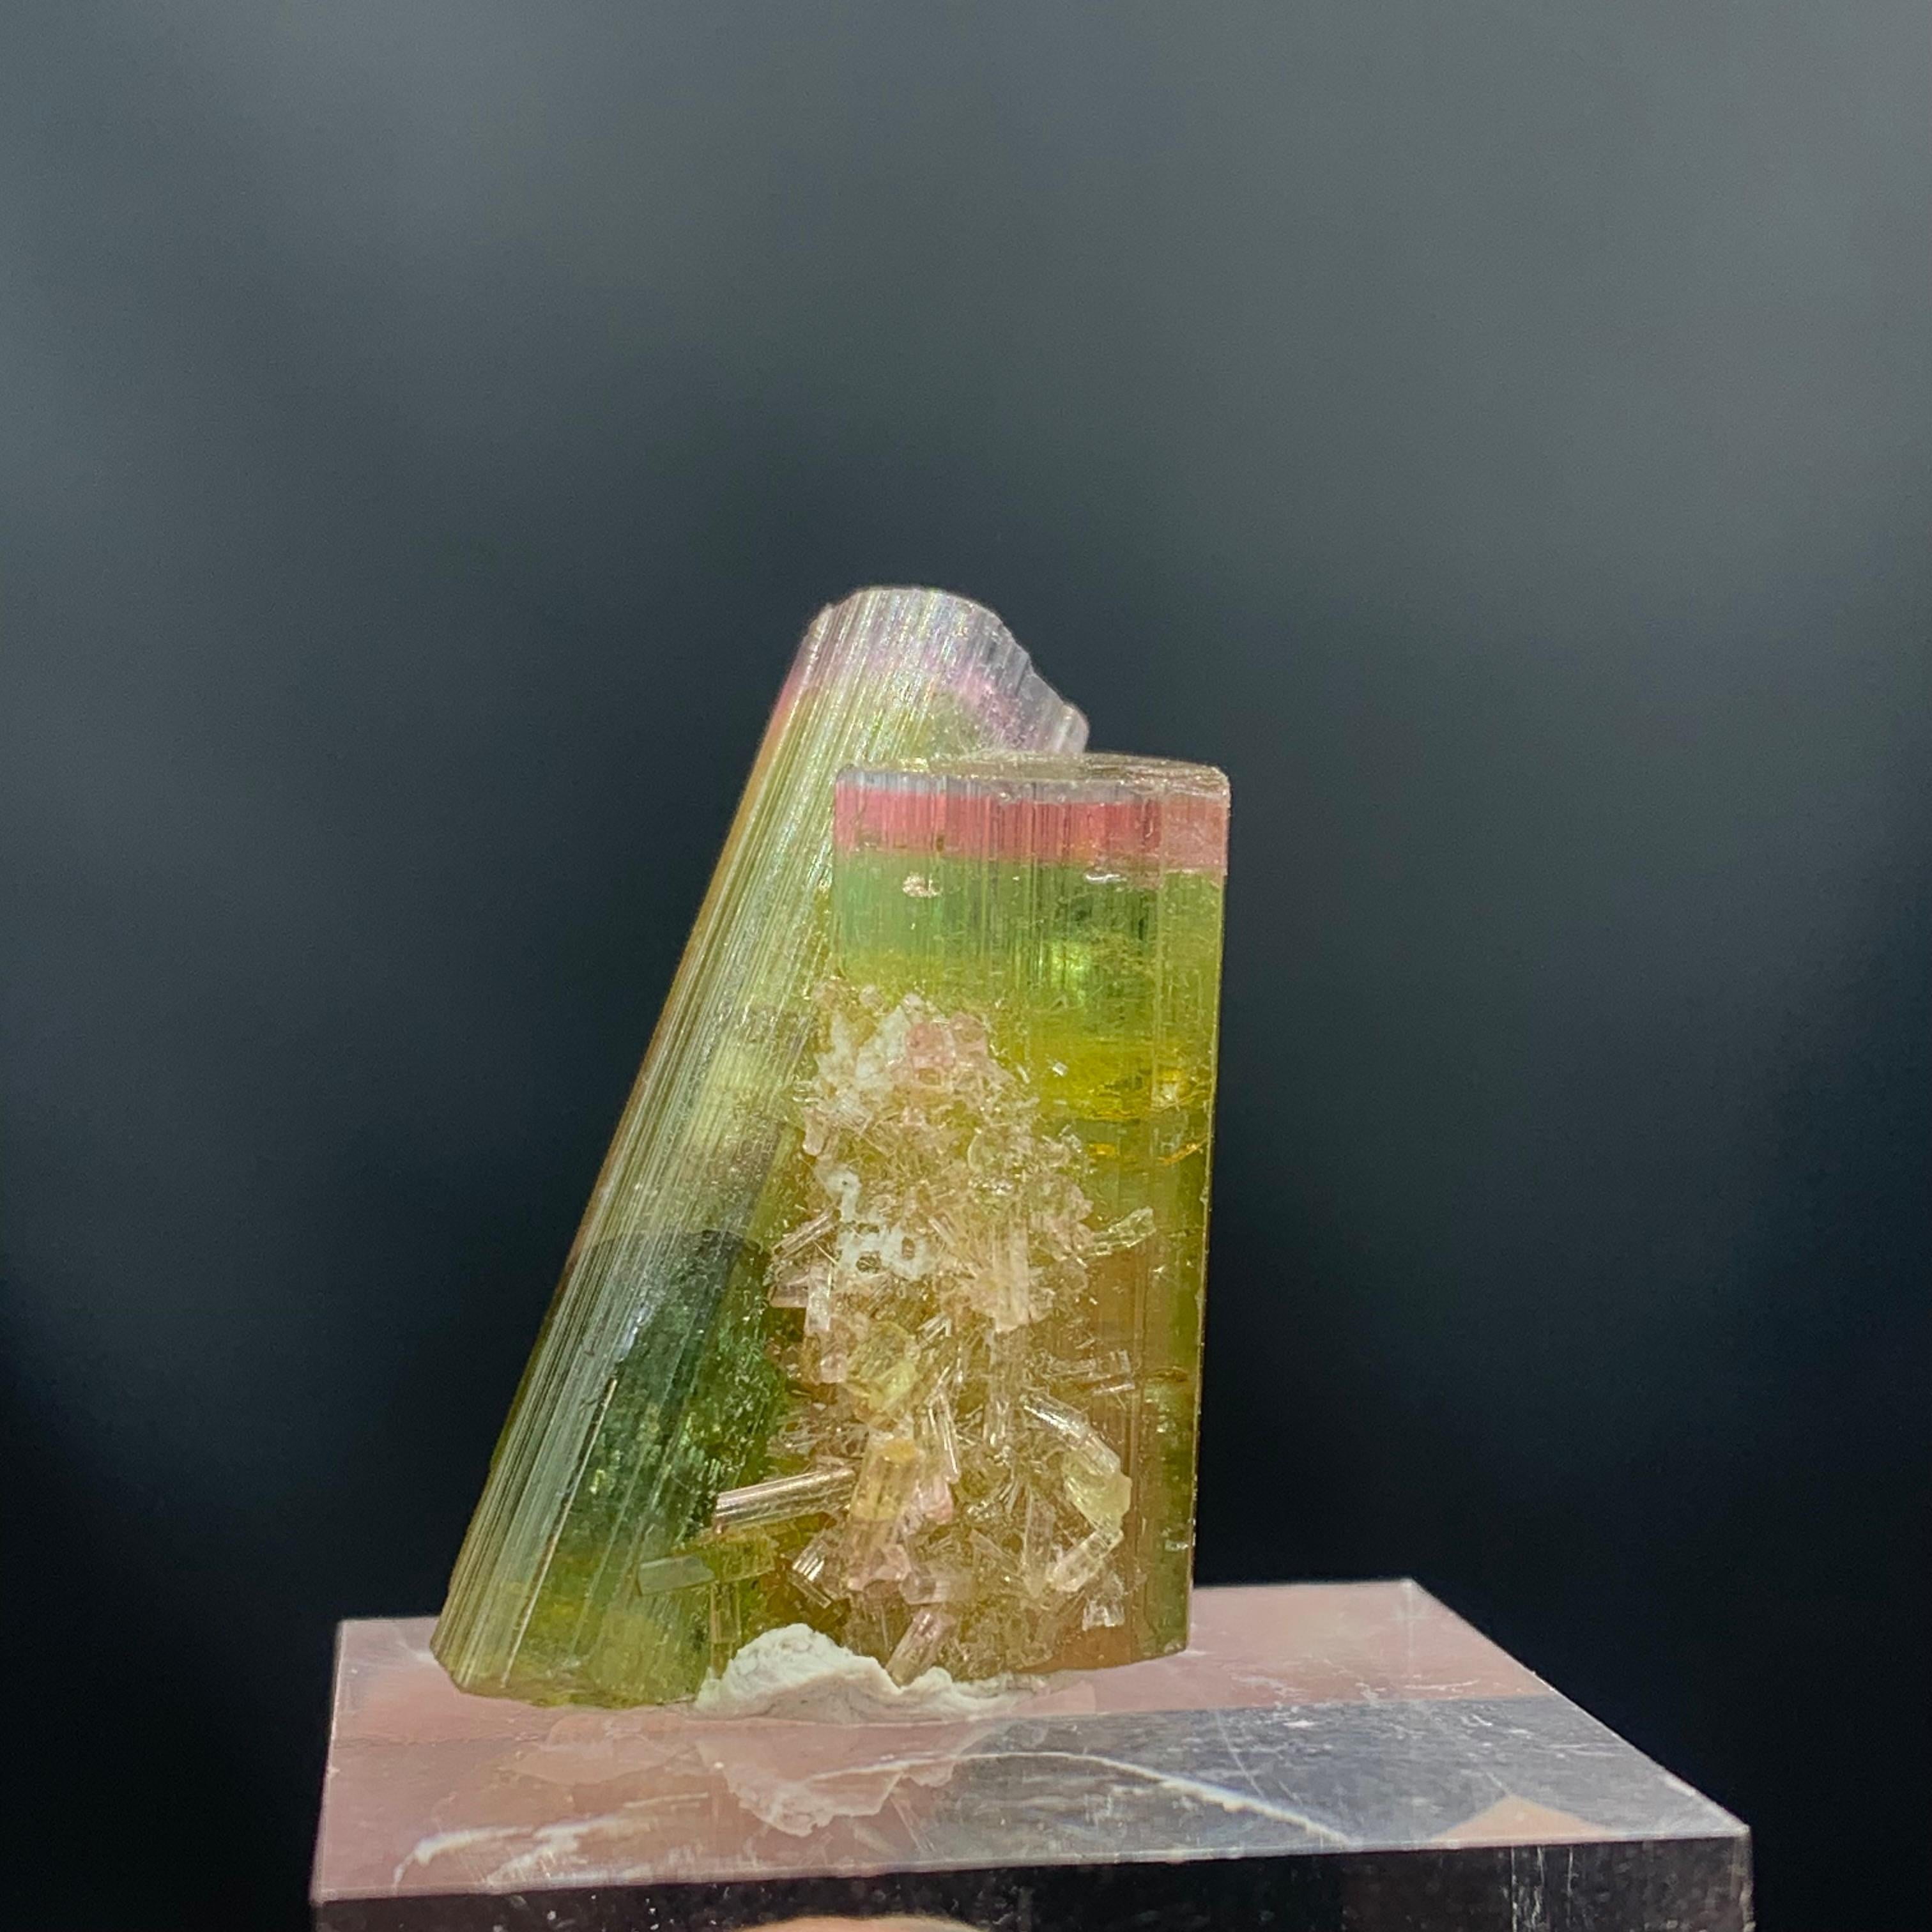 Glamorous Tri Color Combined Tourmaline Specimen From Afghanistan
WEIGHT: 46.05 Carat
DIMENSIONS : 3.0 x 1.8 x 1.3 Cm
ORIGIN: Afghanistan
TREATMENT: None
Tourmaline is an extremely popular gemstone; the name Tourmaline is derived from Turamali,